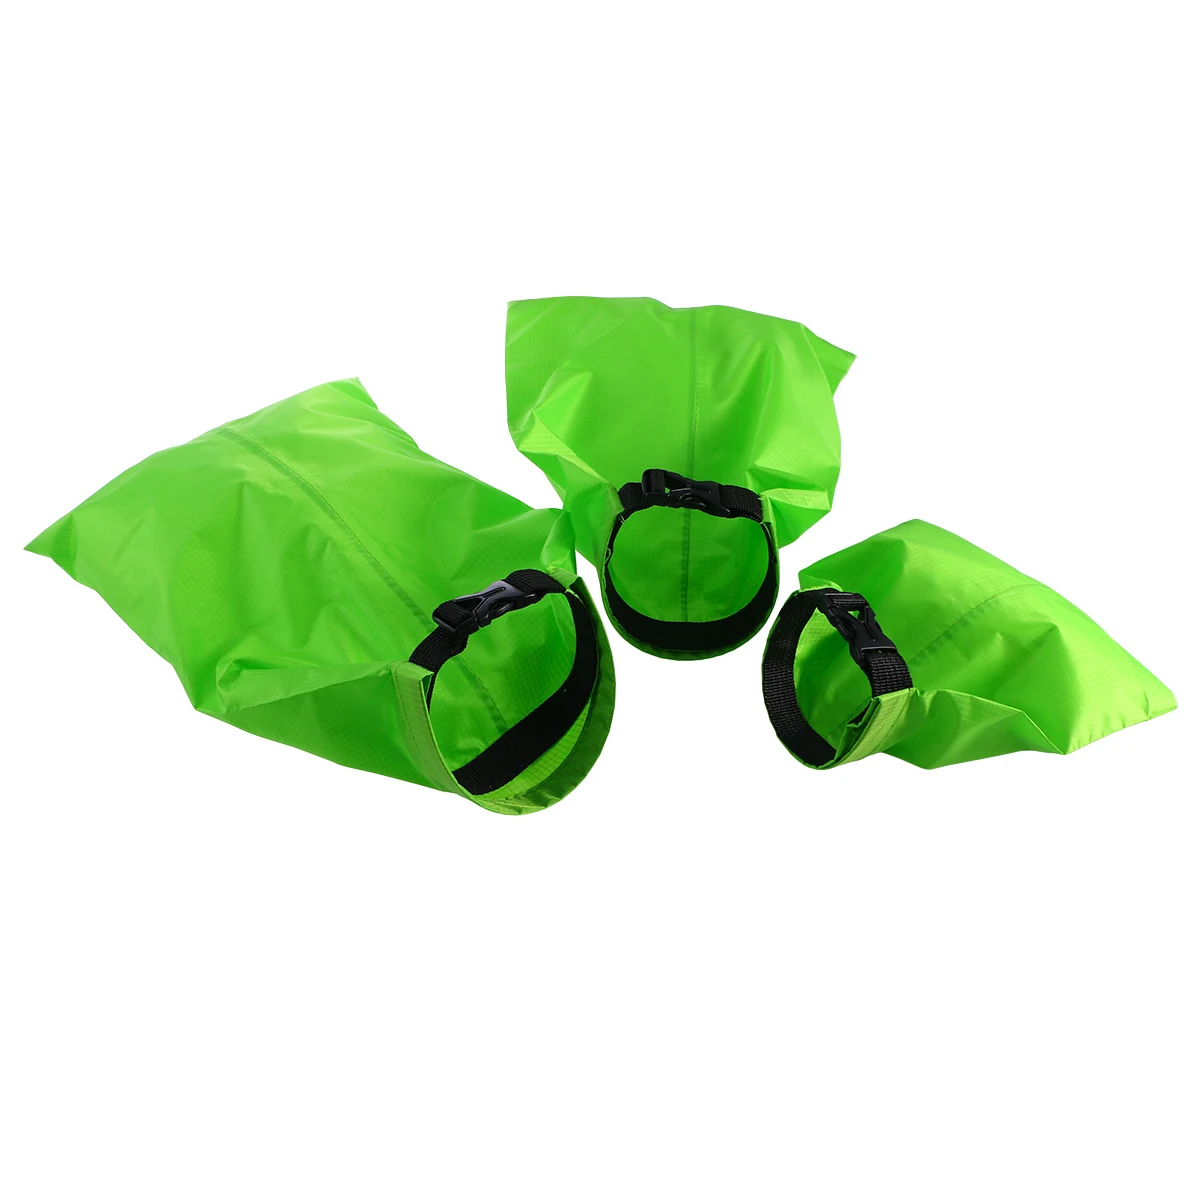 3 pcs 1.5L+2.5L+3.5L Waterproof Dry Bag Storage Pouch Bag for Camping Boating Kayaking Rafting Fishing(Green